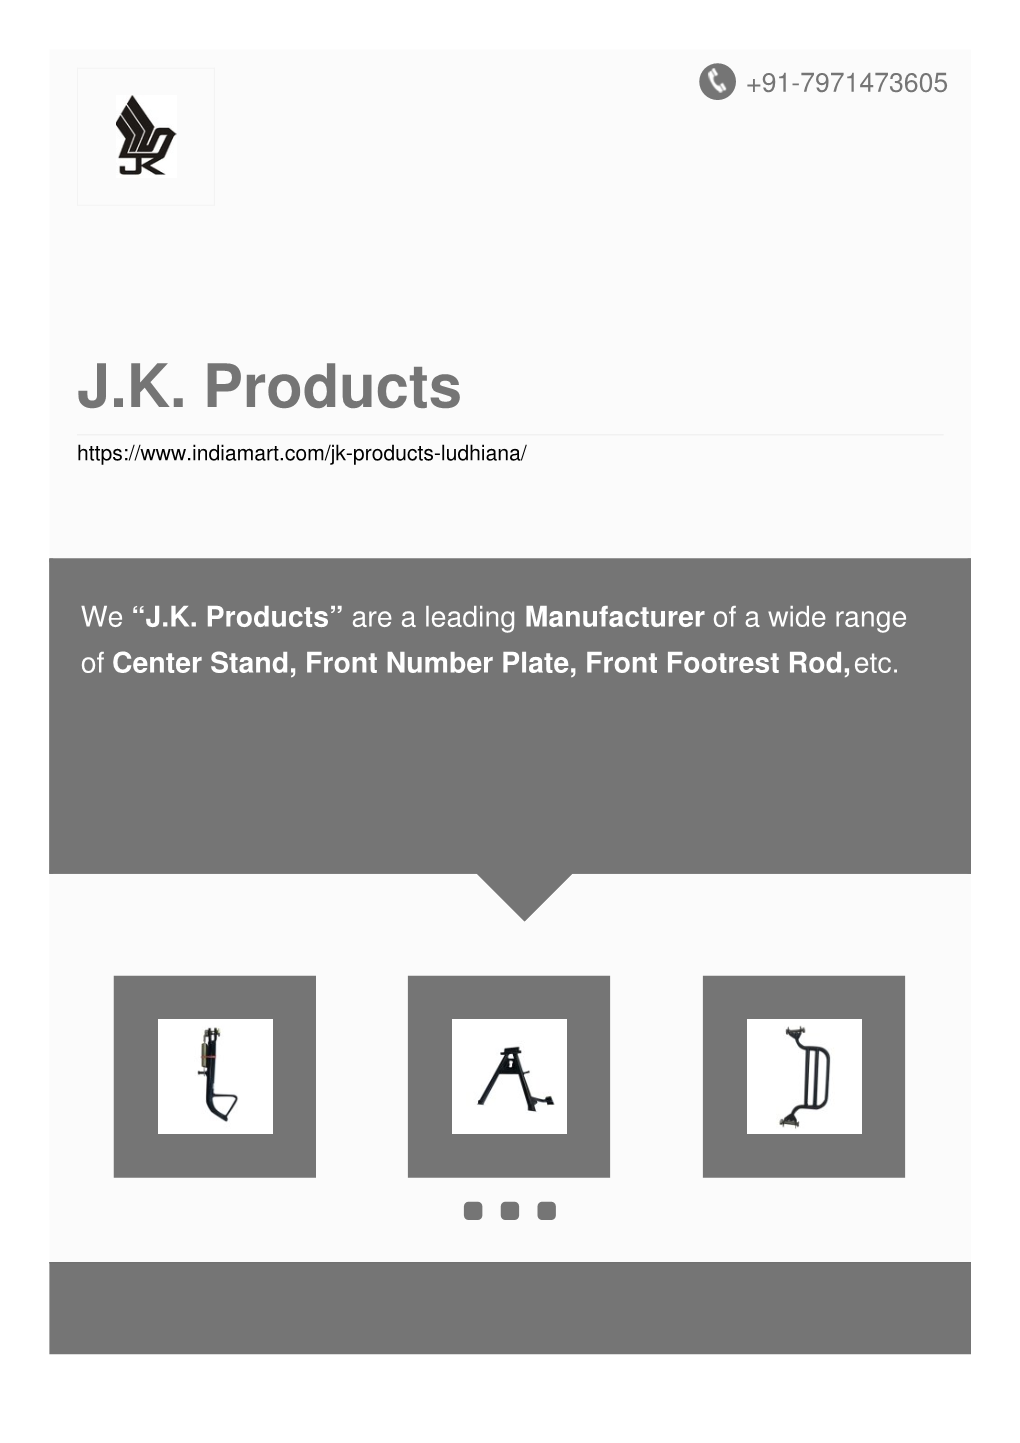 J.K. Products